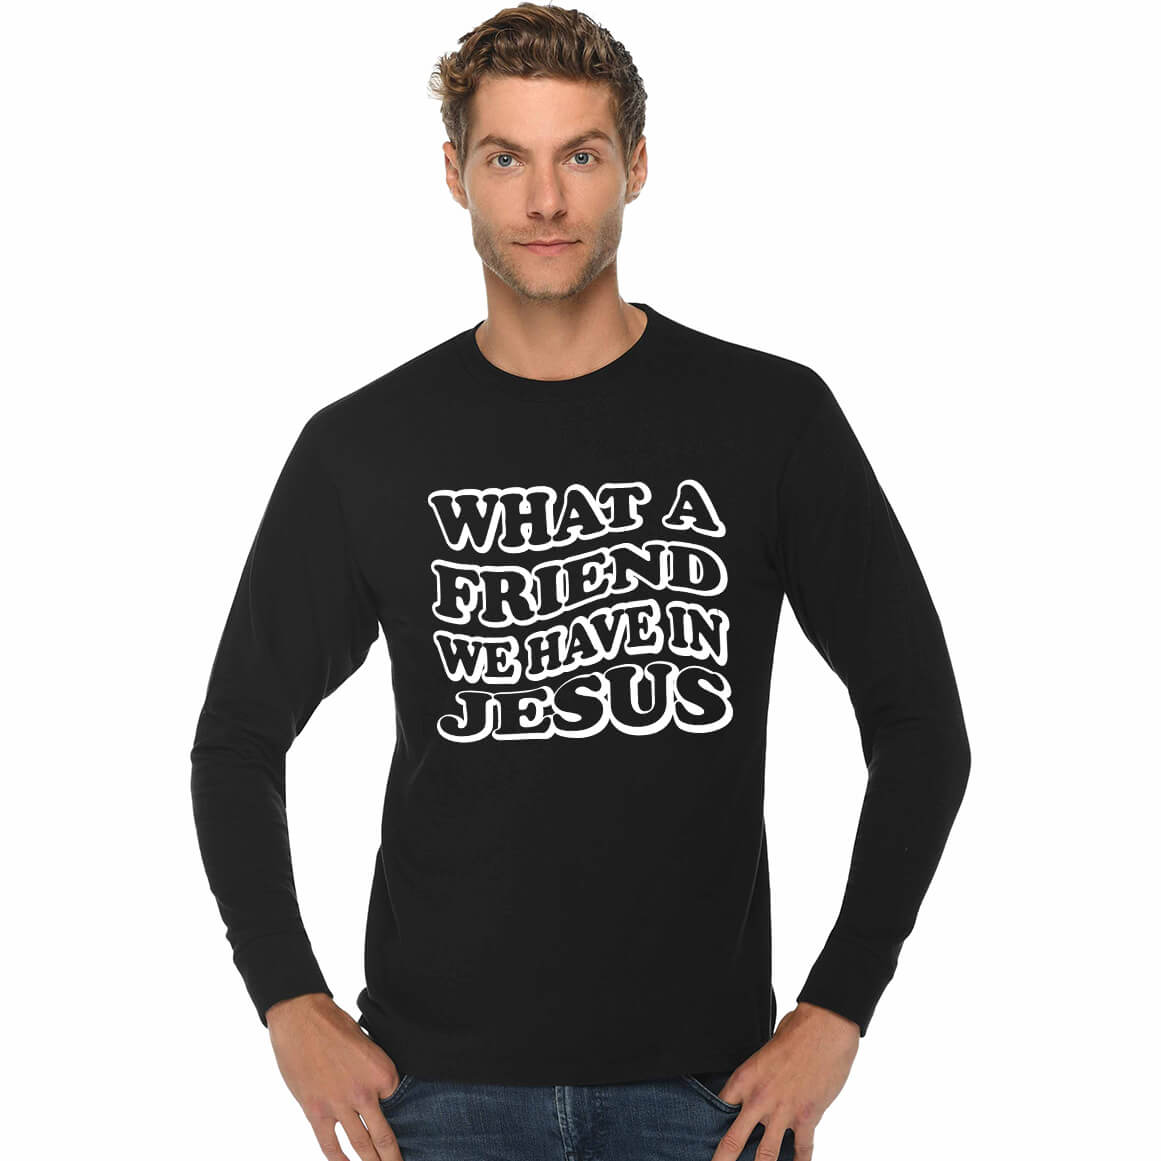 What A Friend We Have In Jesus Men's Long Sleeve T Shirt